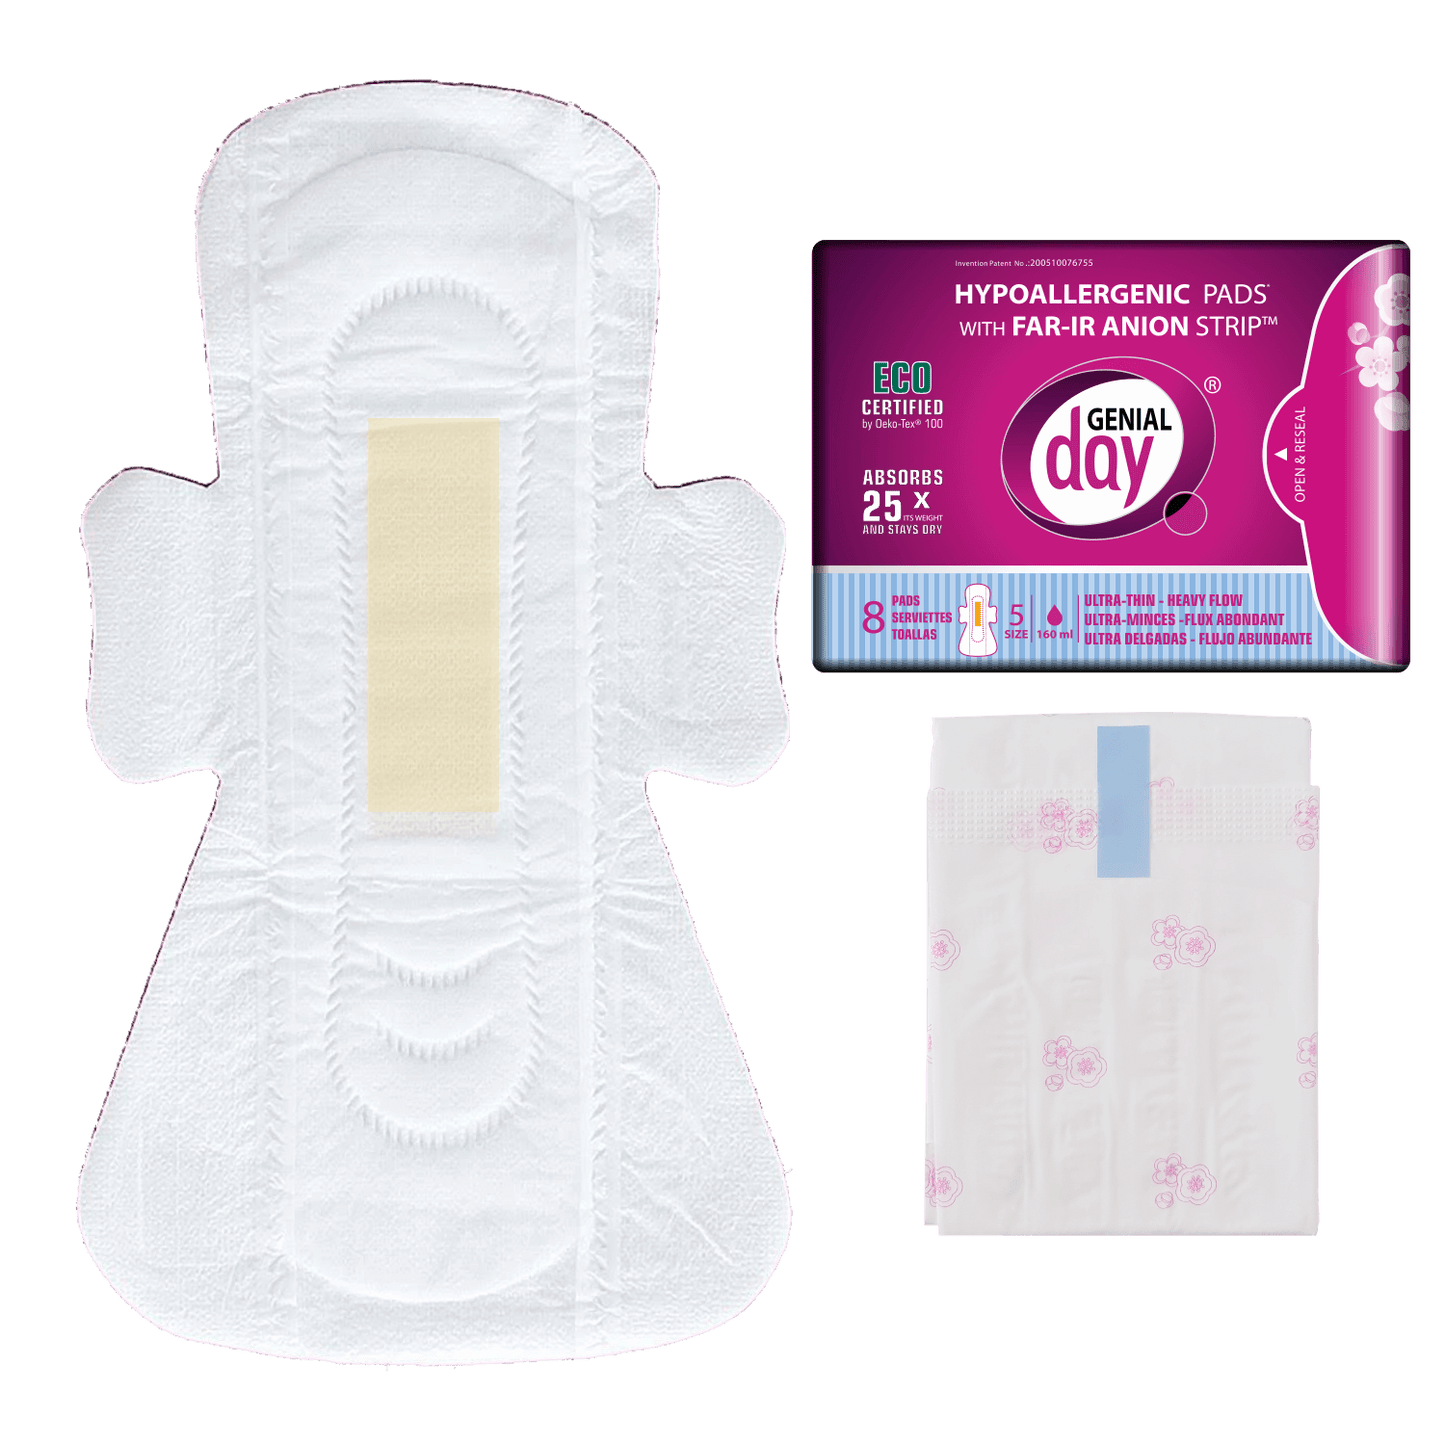 eMoolo Digital Logistics > Sanitation & Hygiene > ALWAYS SANITARY PADS, 3  IN 1,MENSTRUAL DISPOSABLE PADS,MAXI THICK,EXTRA STRONG,PACK OF 7 PIECES